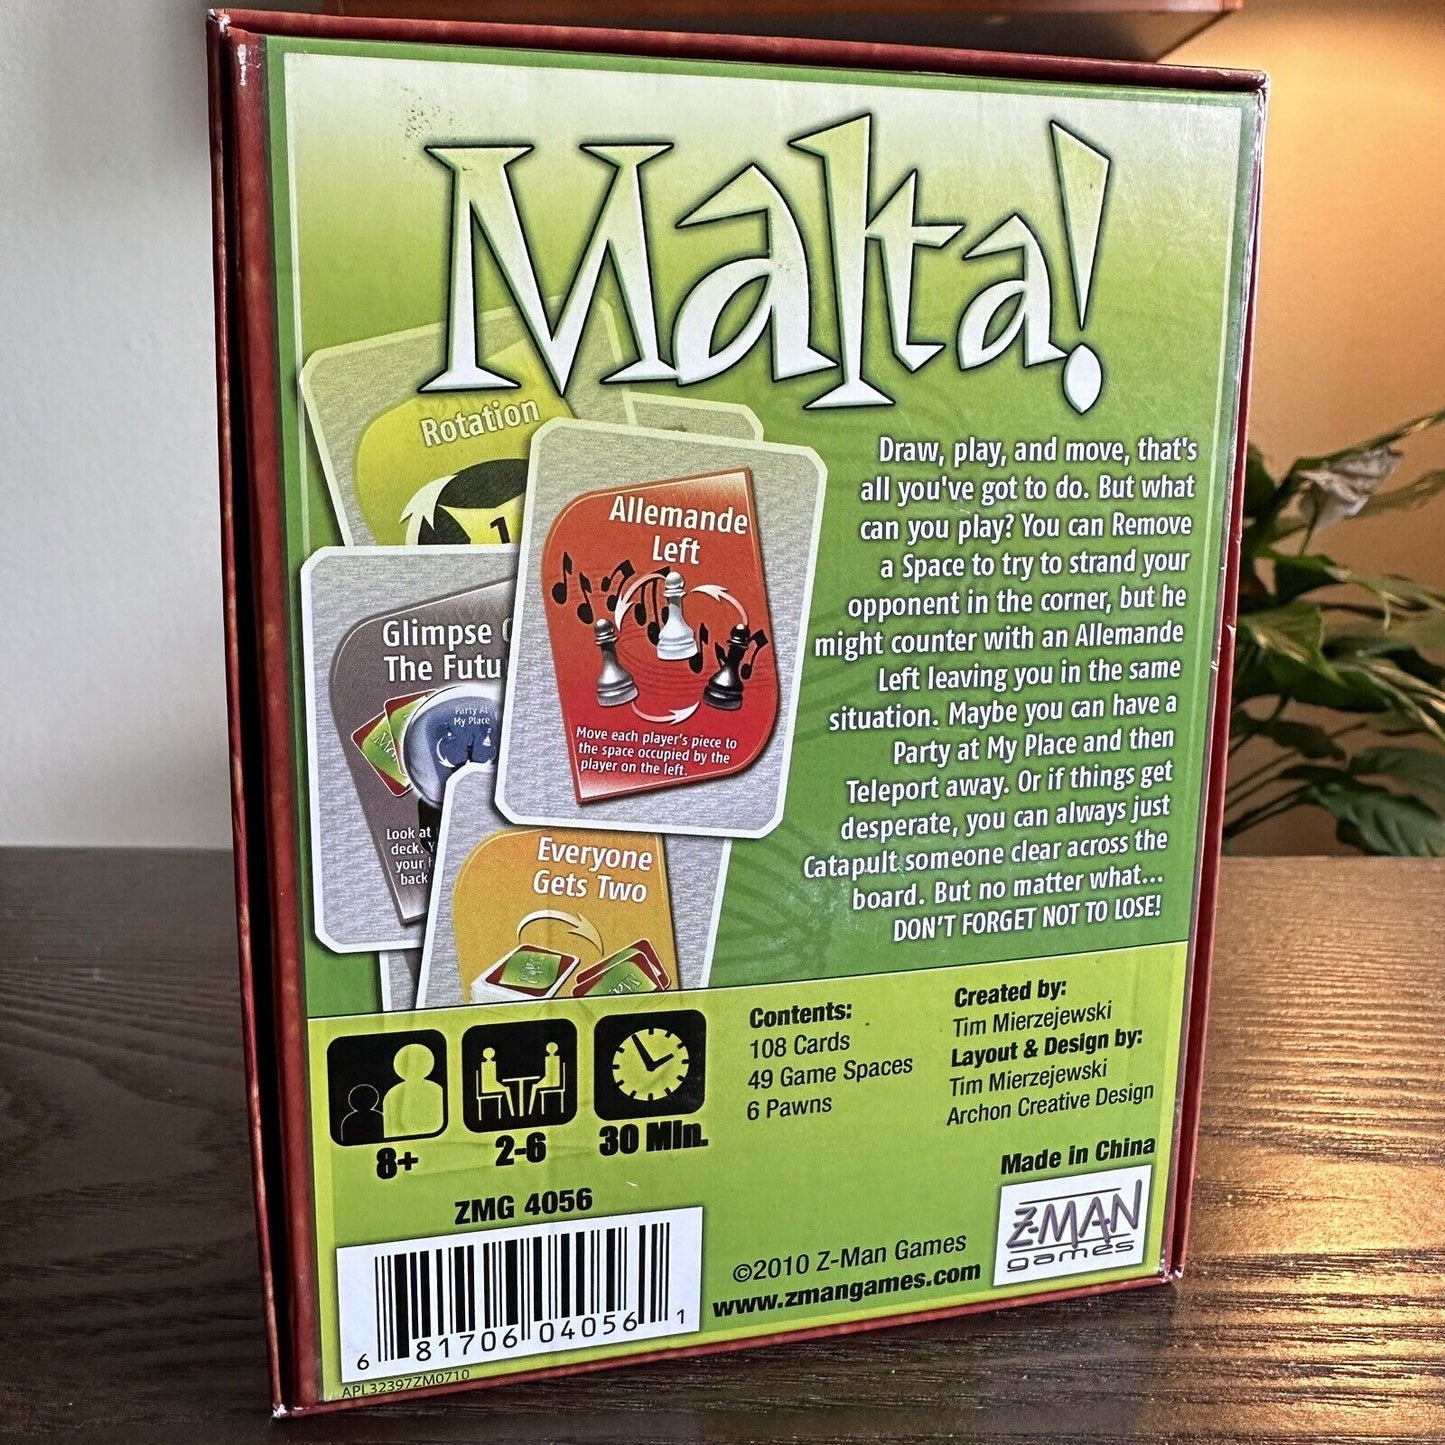 Z-Man Malta! Card Game Cutthroat Strategy Fun Reactions Fast 2-6 Players